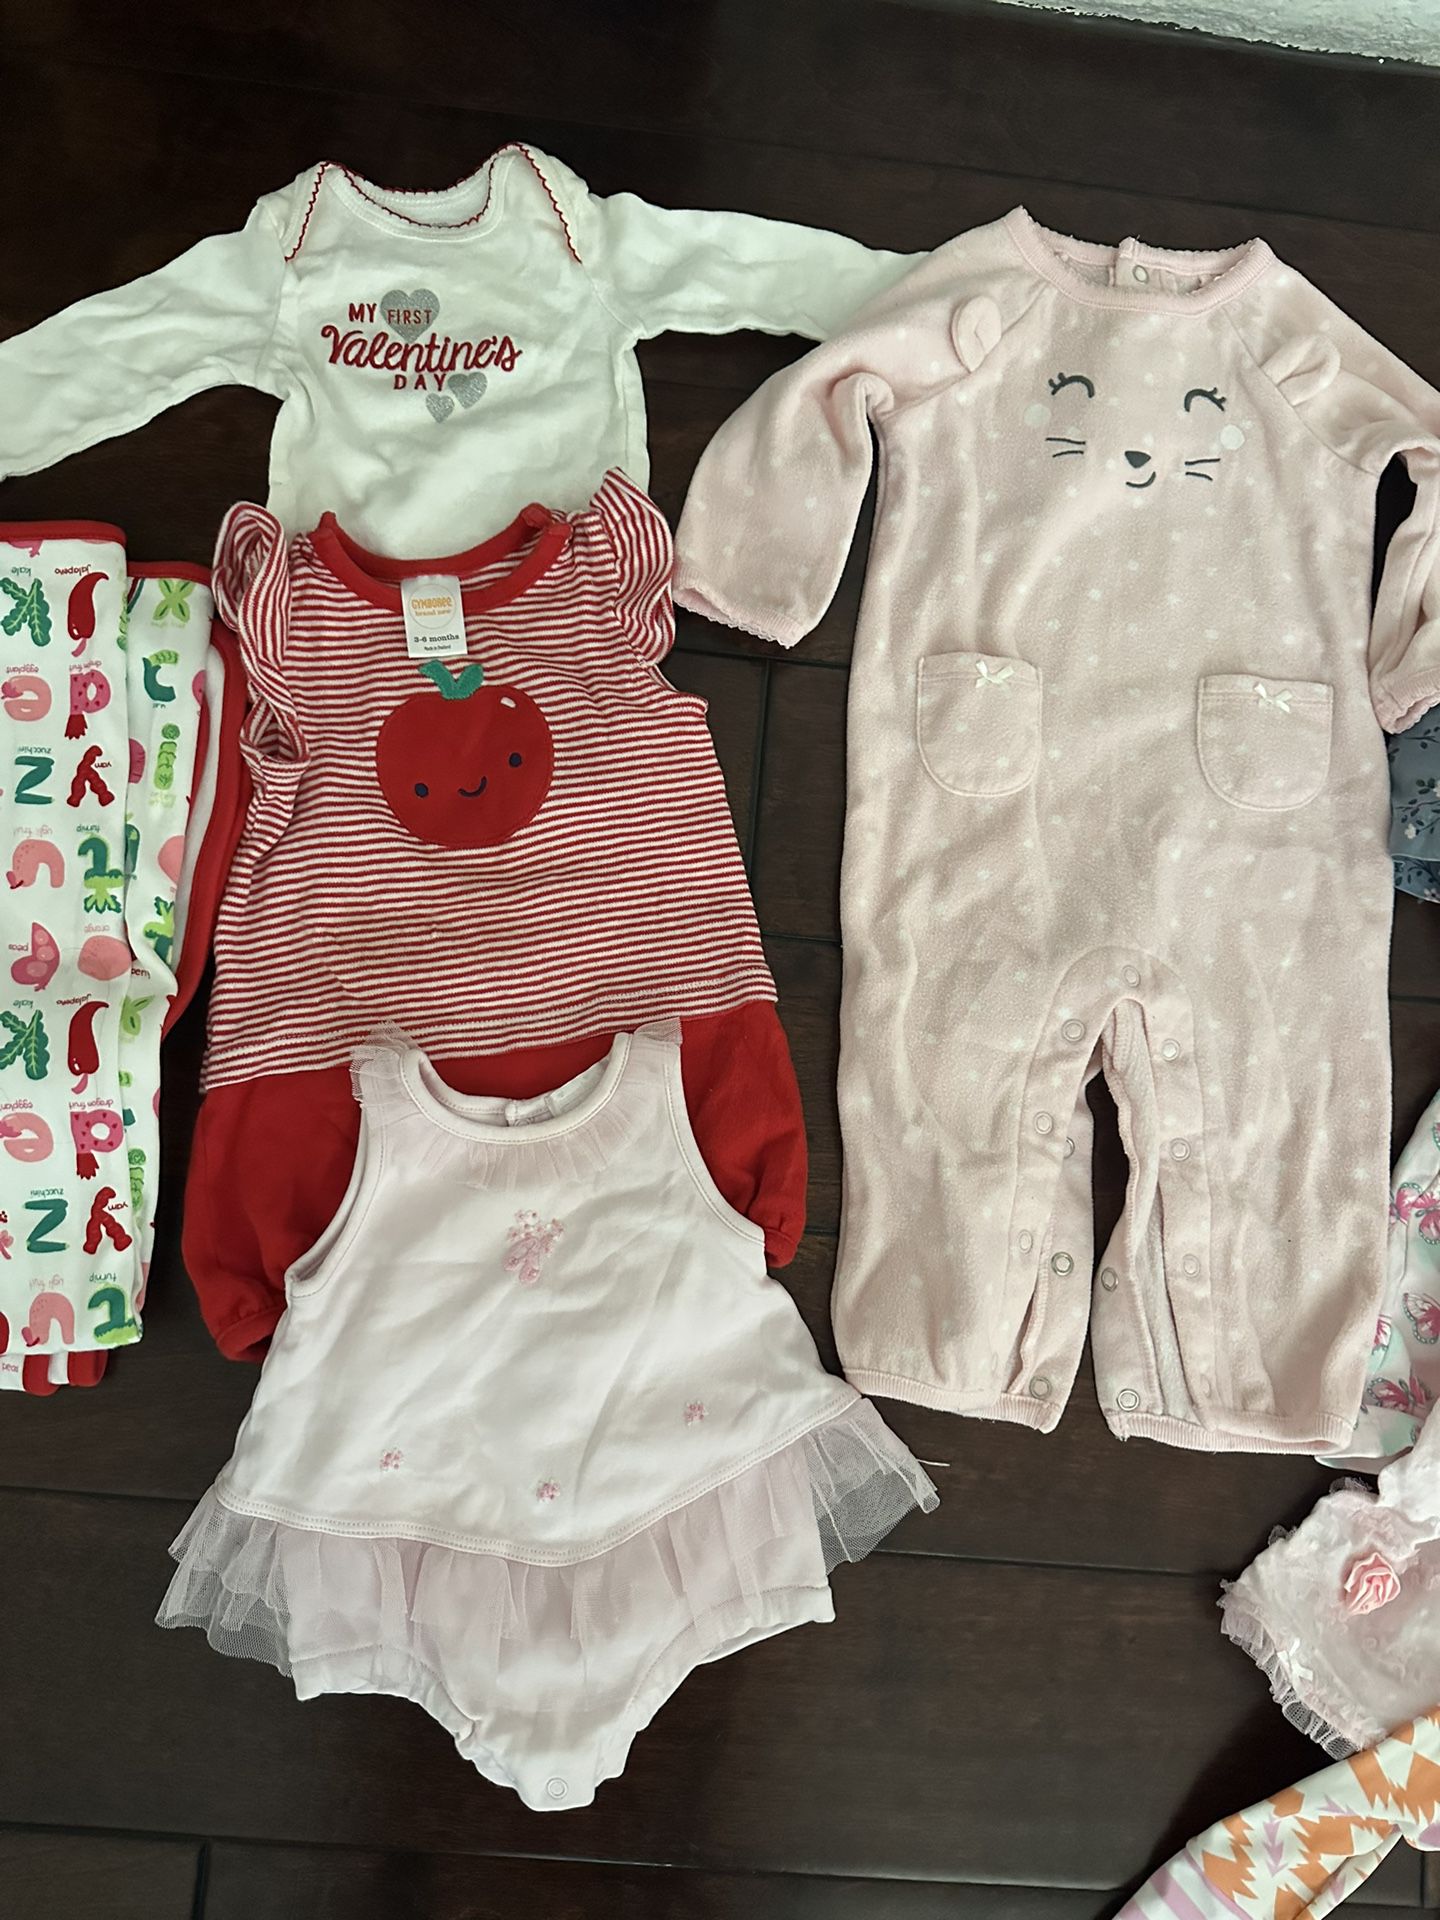 Baby Girl Clothes 0-12months Bundle 